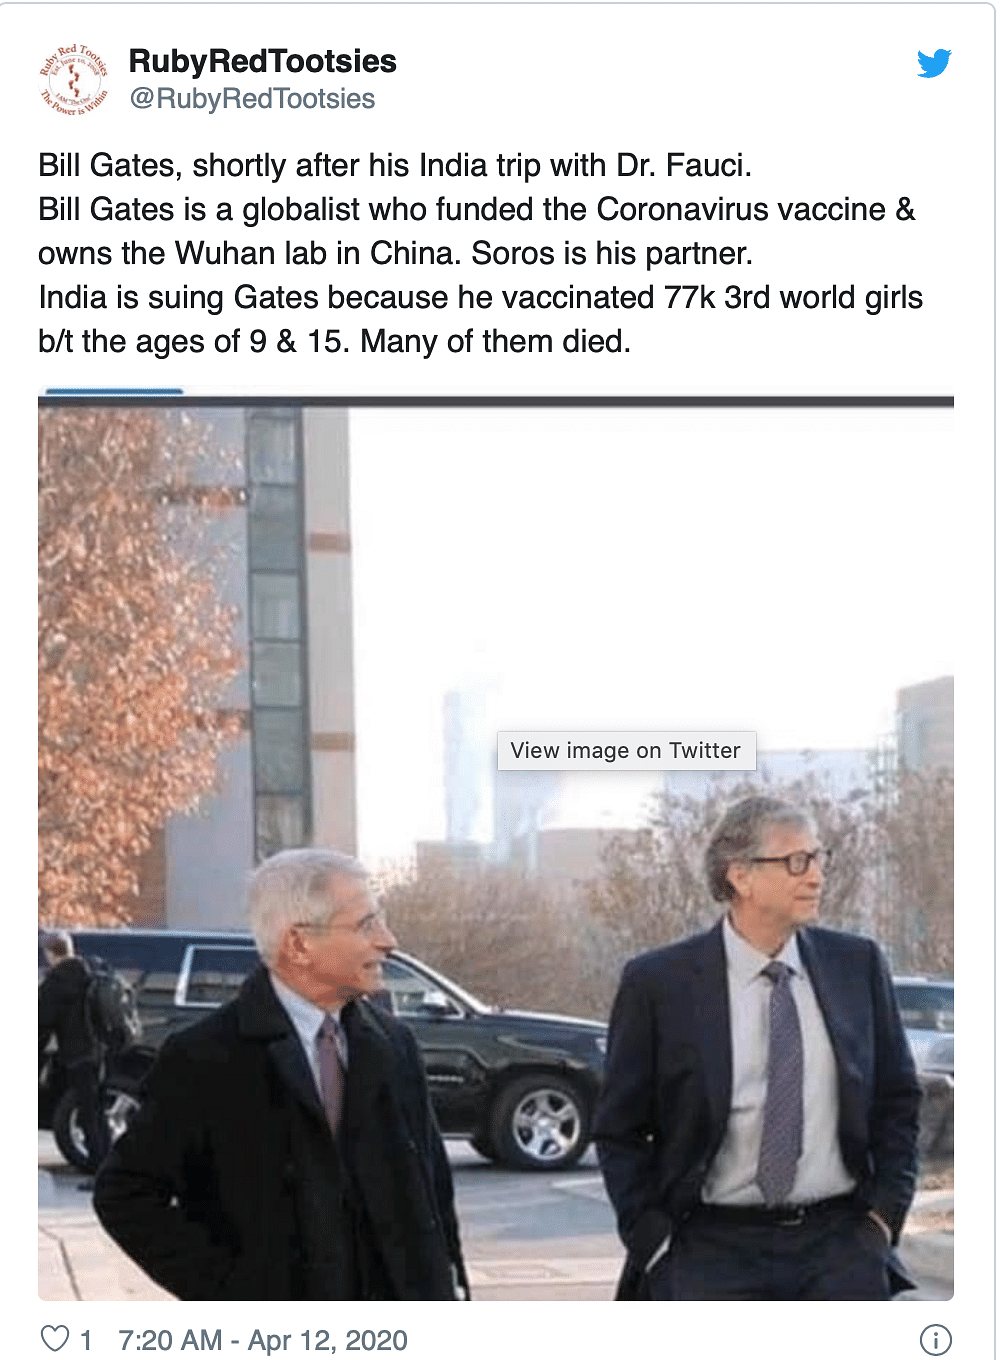 The post also claims that Gates is a “globalist who funded the Coronavirus vaccine and owns the Wuhan lab in China.